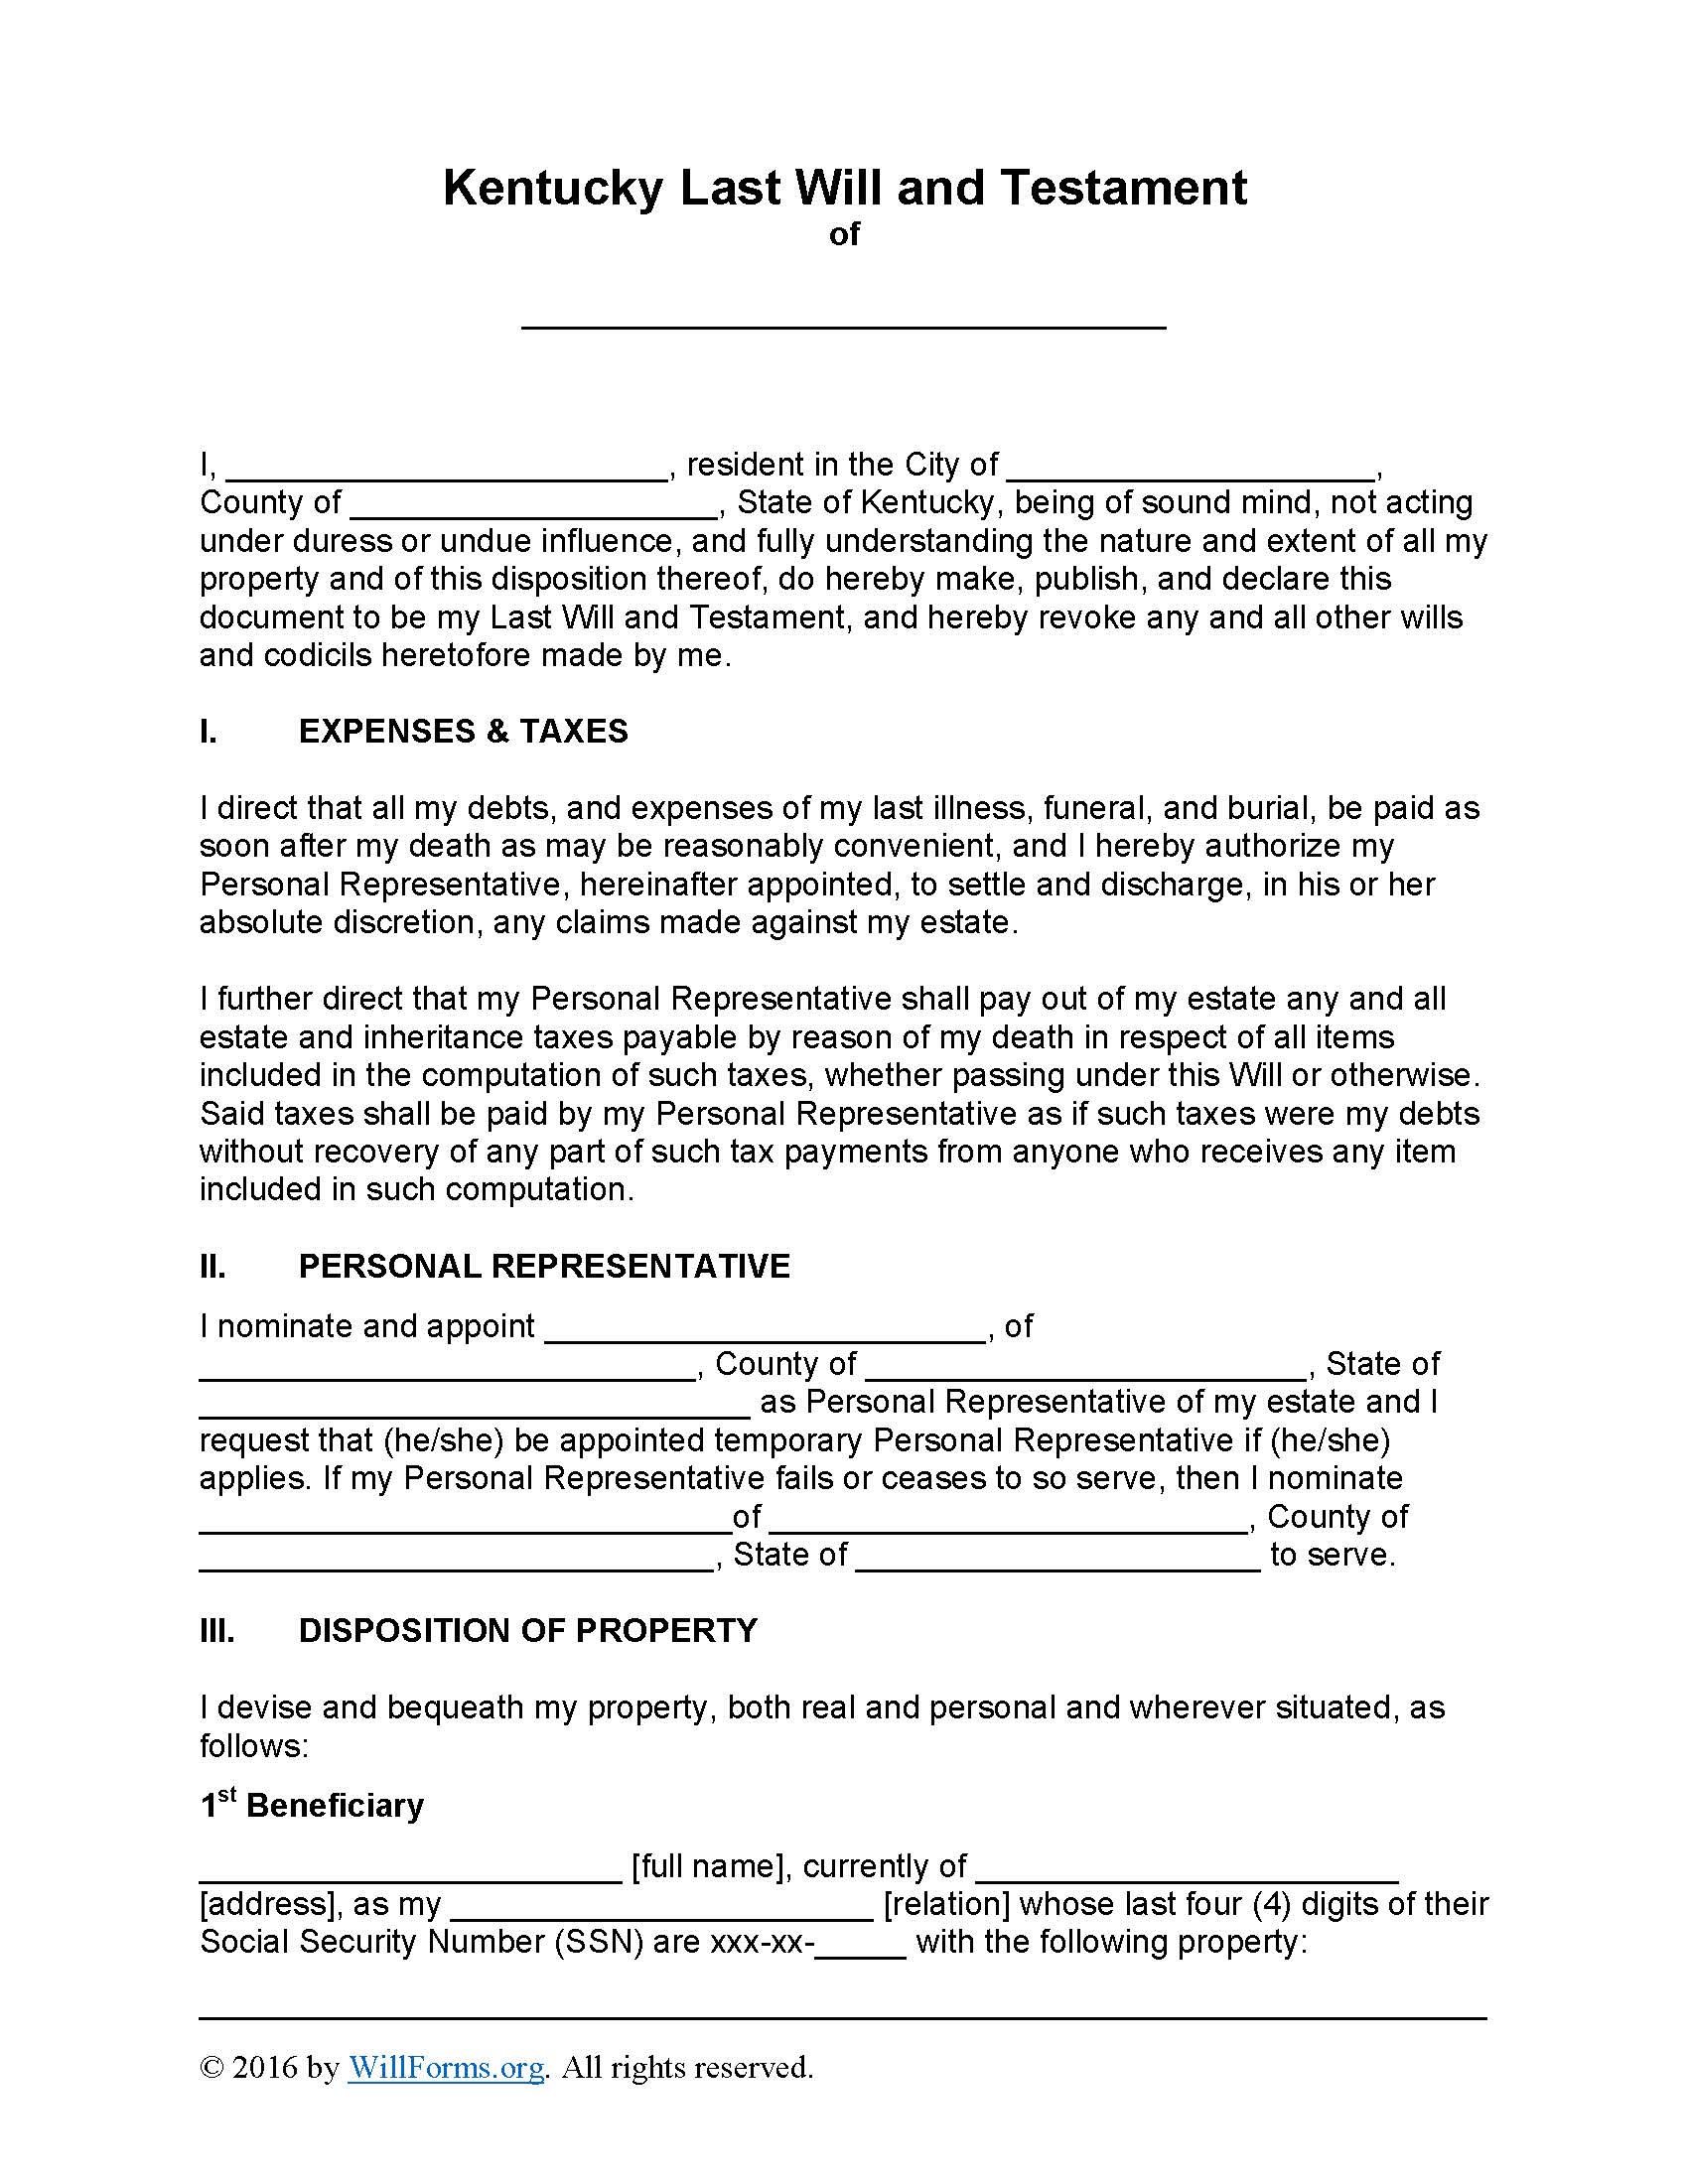 Kentucky Last Will and Testament Form